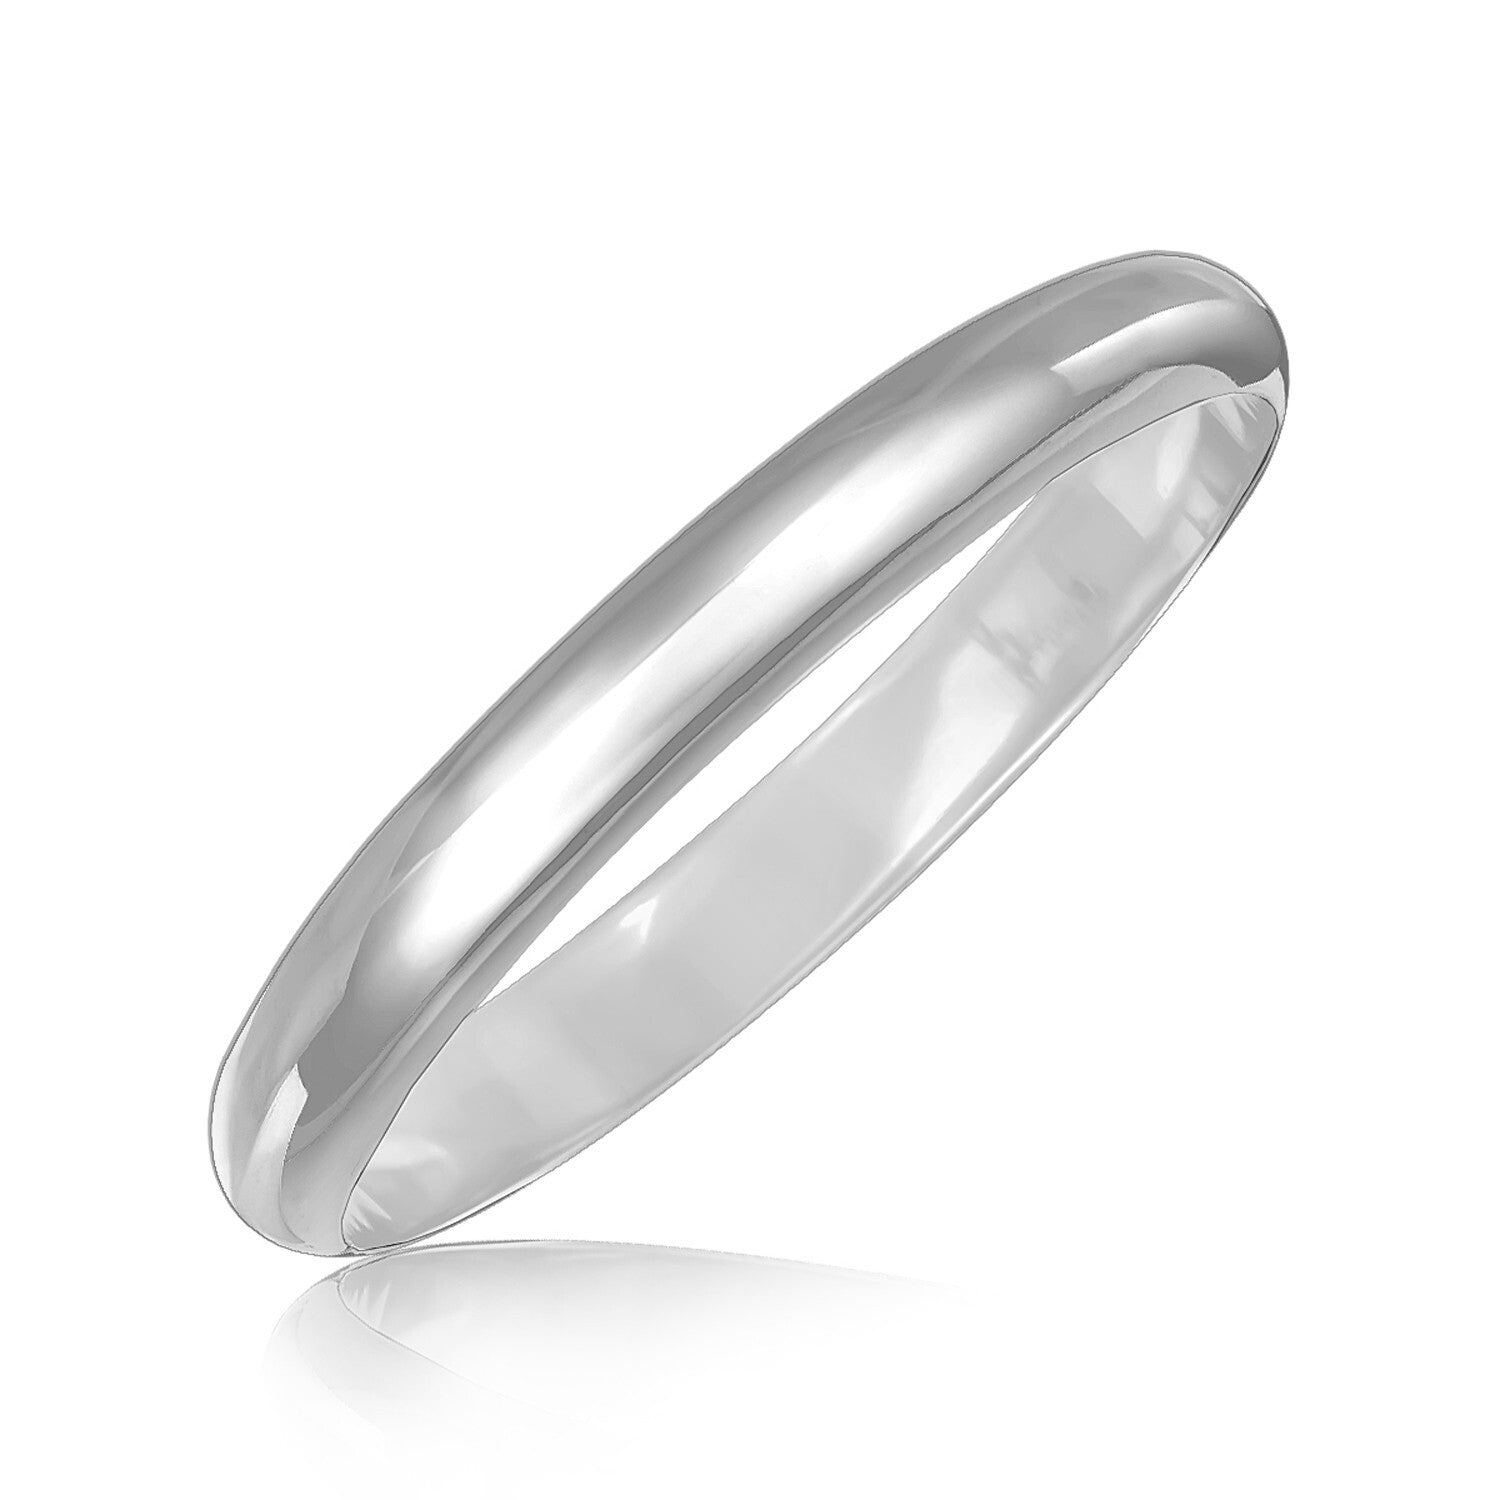 Sterling Silver Dome Style Bangle with Rhodium Plating, size 7.5''